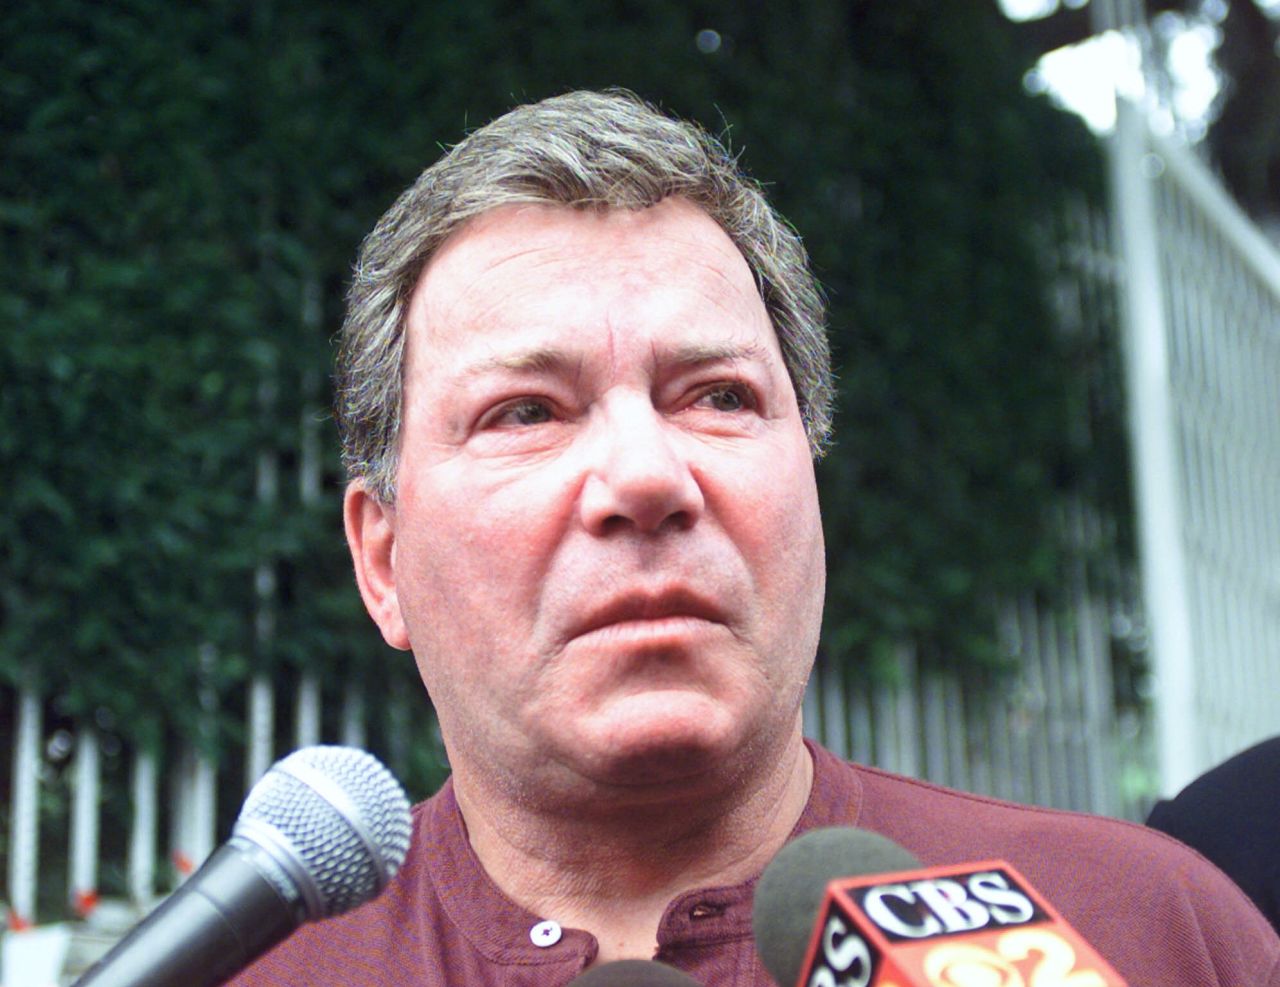 Shatner speaks to reporters after the death of his third wife, Nerine Kidd, in 1990. Shatner found her body after she had drowned in their swimming pool.